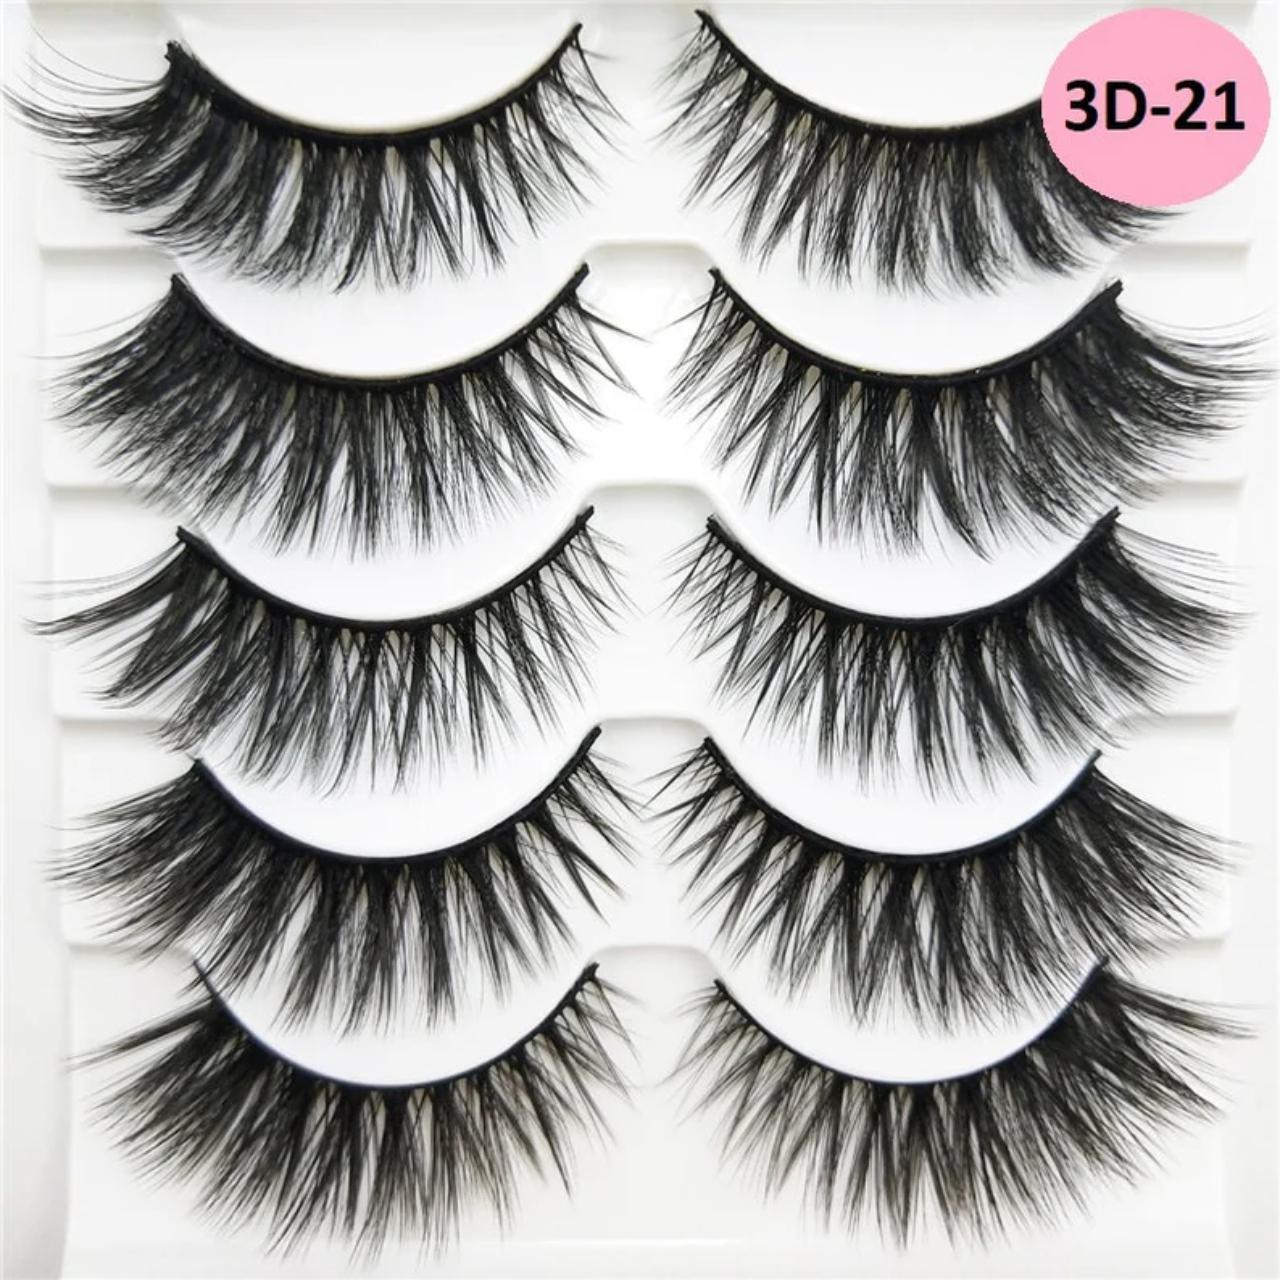 Product Image 1 - 5 pairs of super dramatic